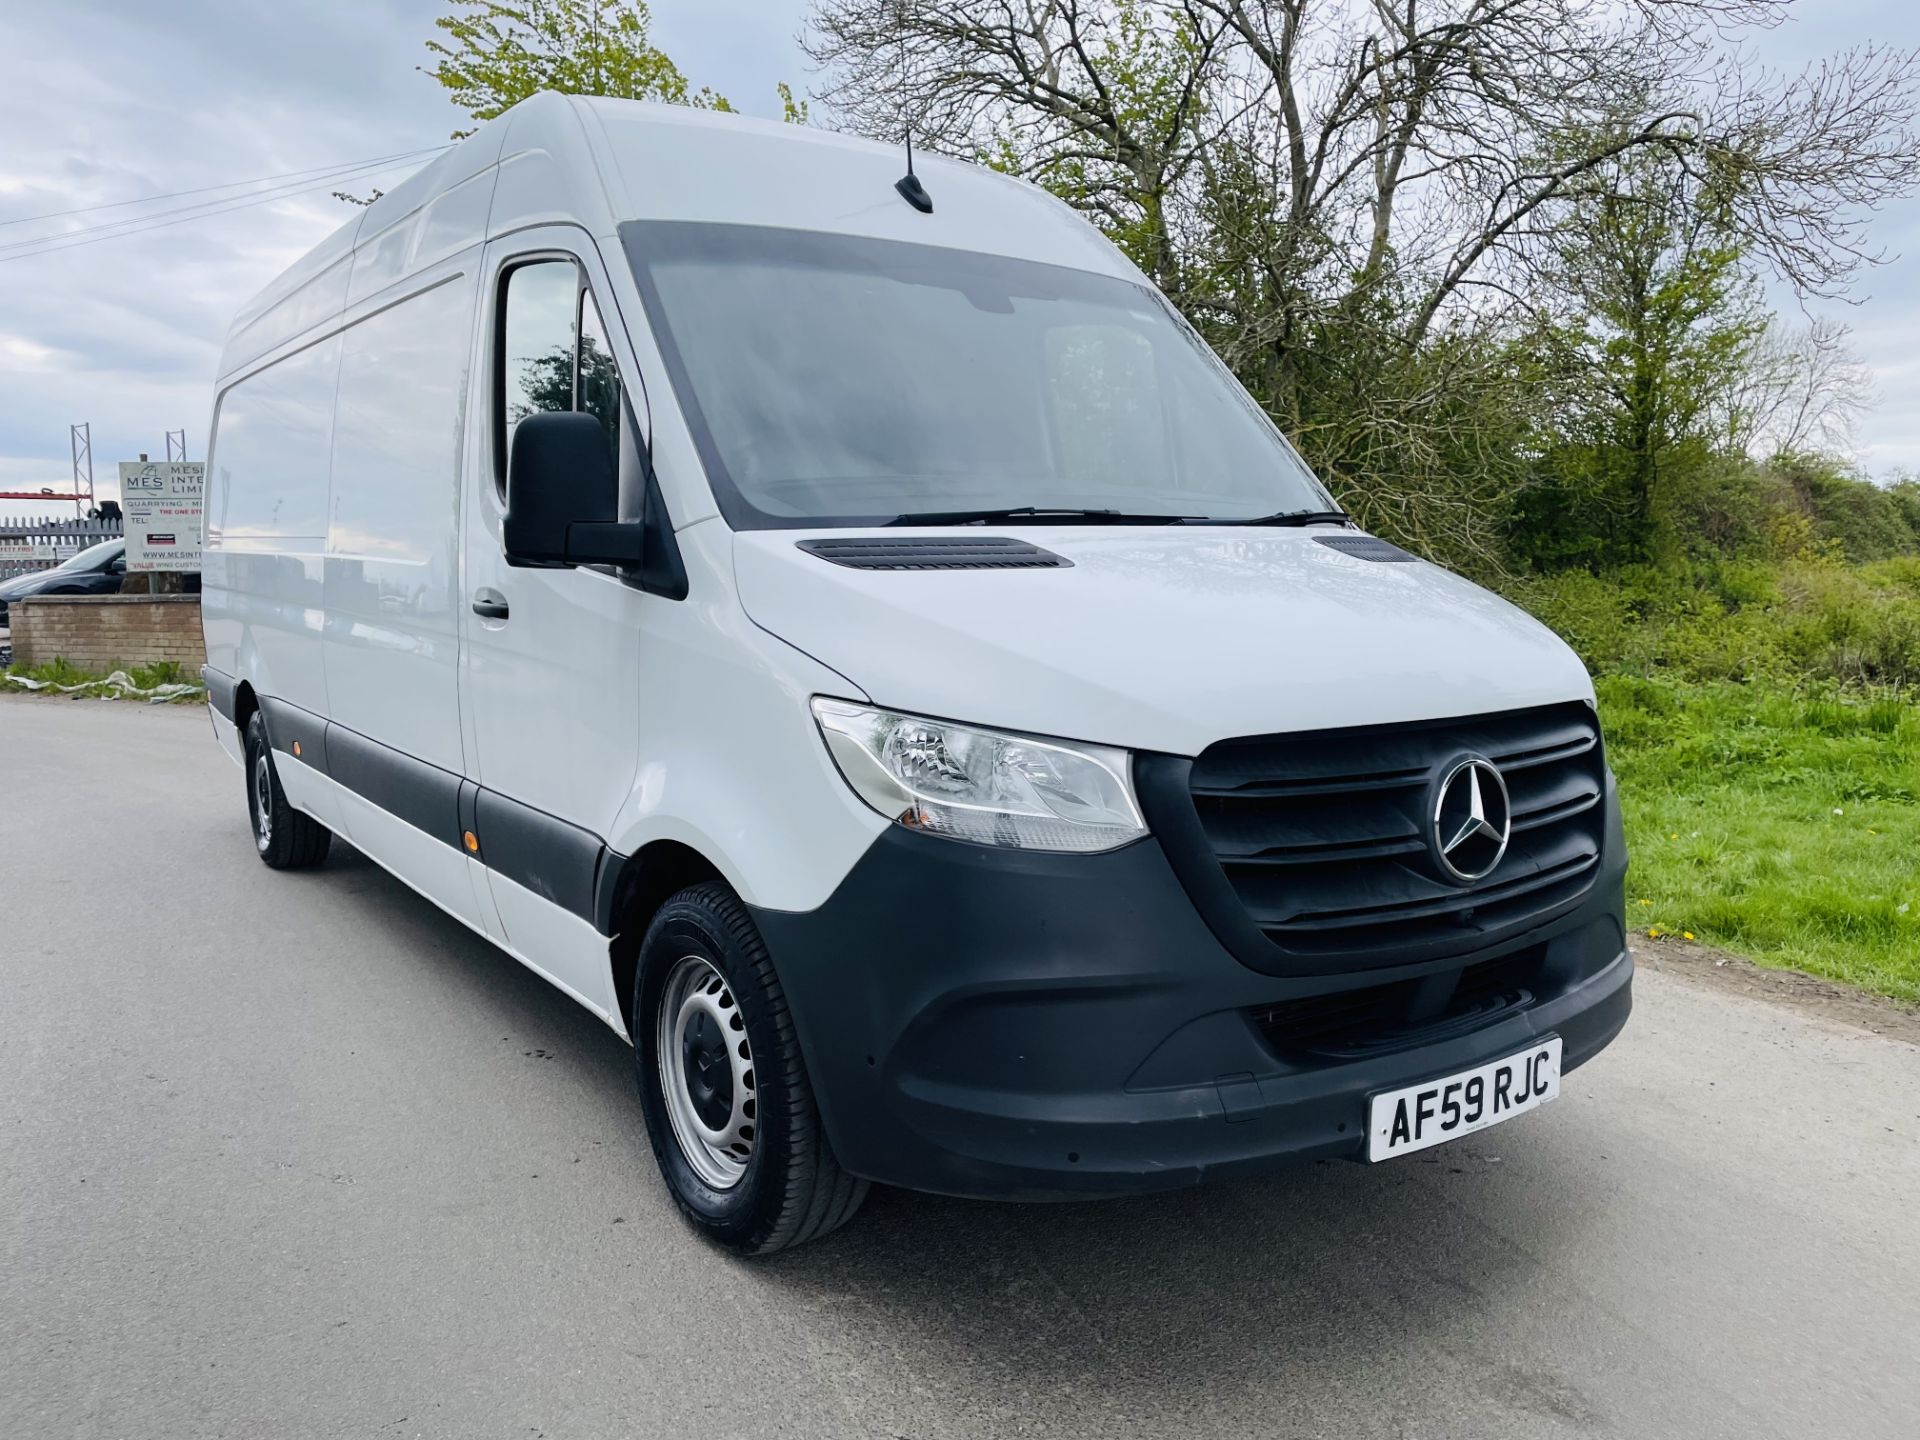 (ON SALE) MERCEDES SPRINTER 314CDI "LWB" HIGH ROOF (19 REG) EURO 6 - ONLY 83K MILES - CRUISE CONTROL - Image 10 of 17